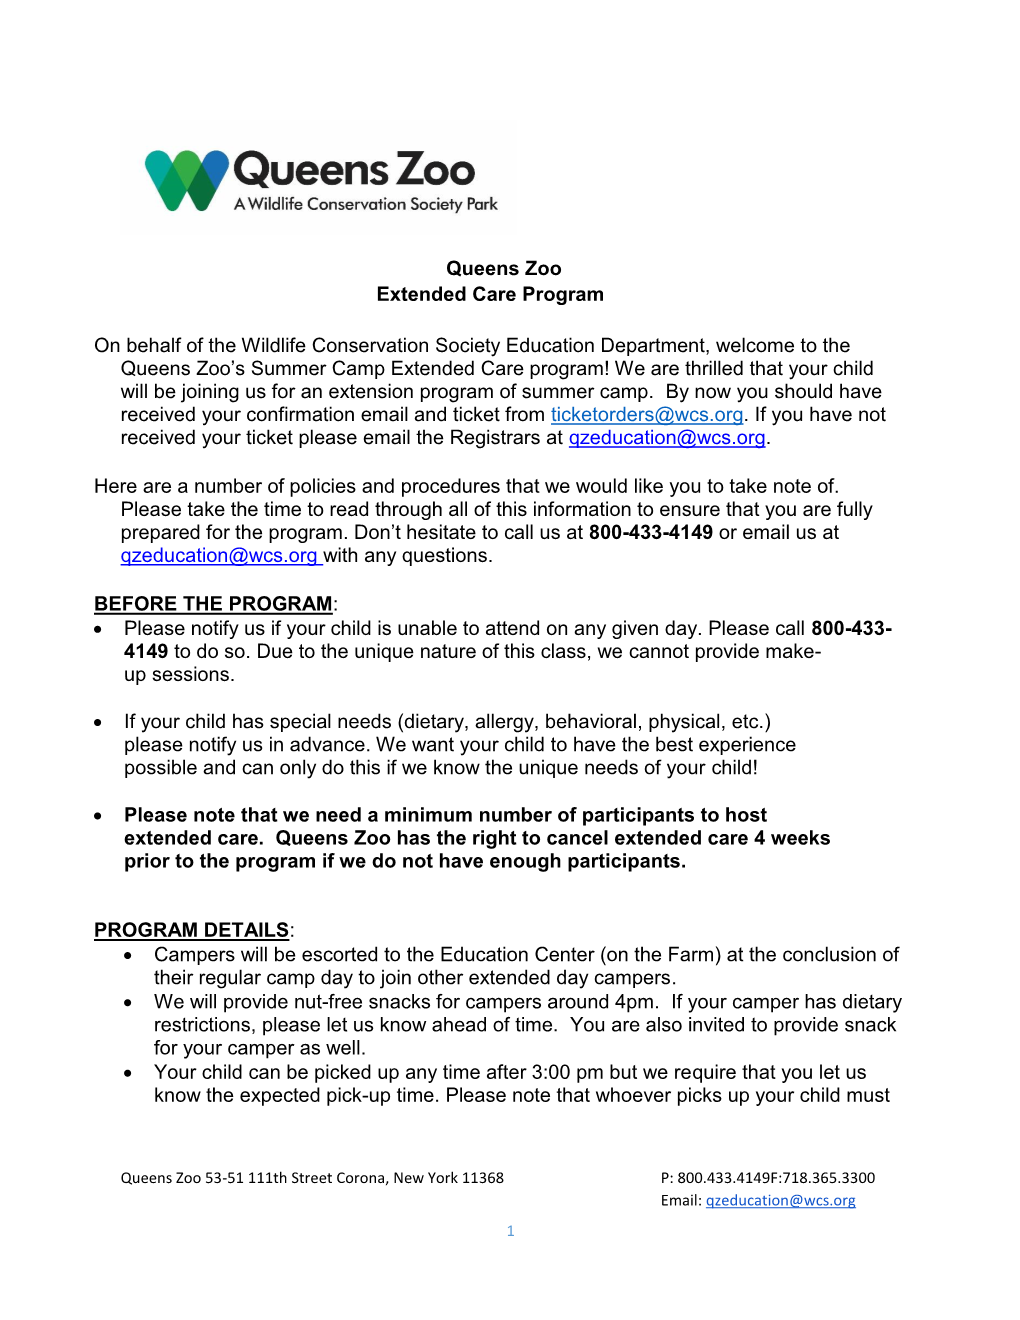 Queens Zoo Extended Care Program on Behalf of the Wildlife